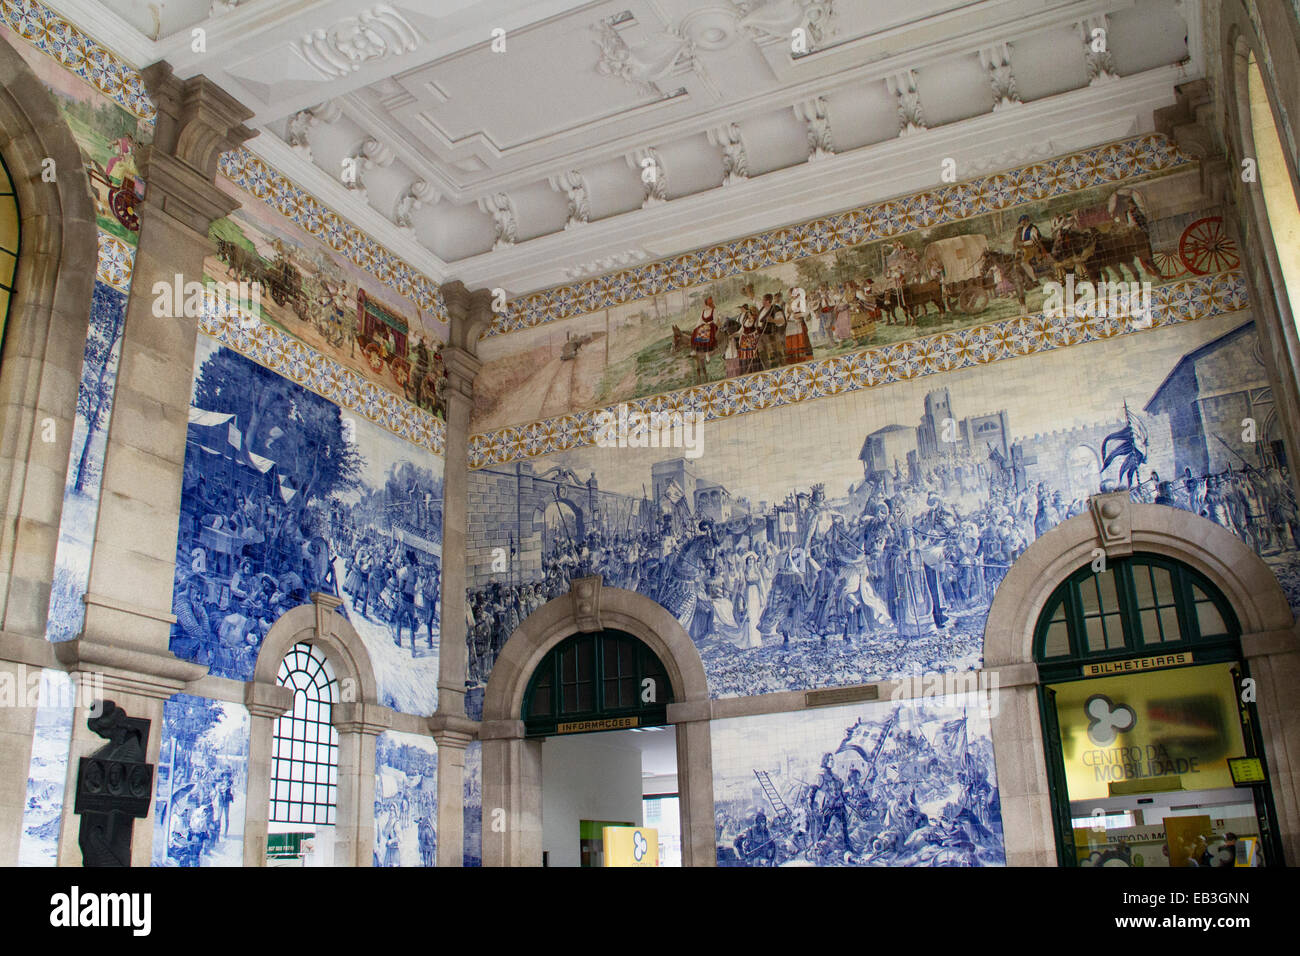 Sao Bento Station, the central railway station was buuilt in 1916 and decorated with painted ceramic tiles called azulejos by Jo Stock Photo